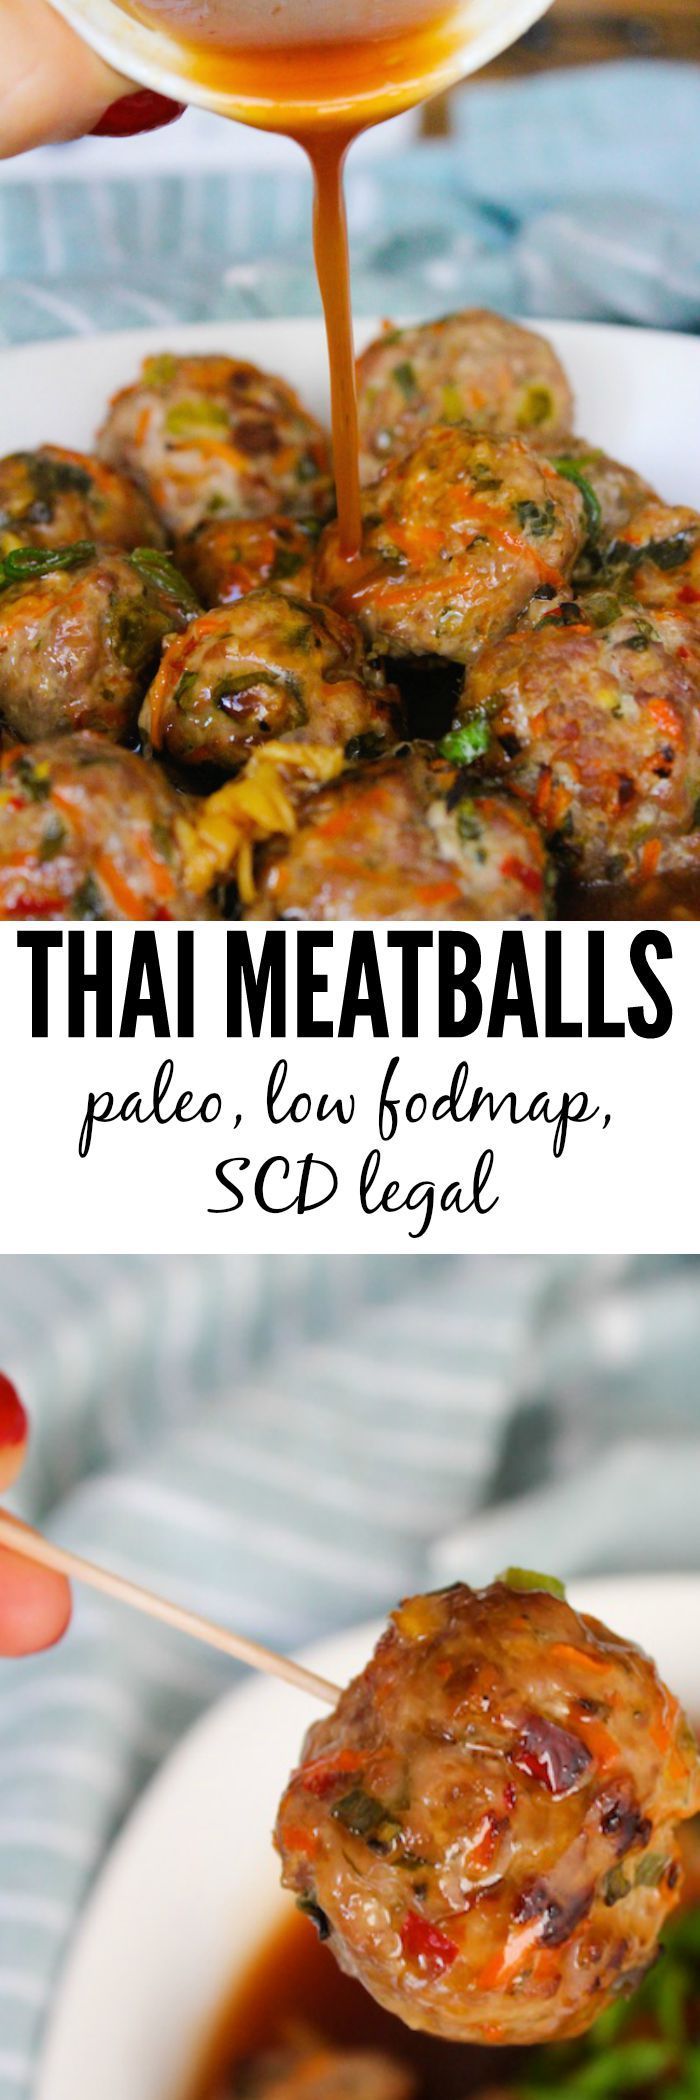 Paleo, Low FODMAP, SCD Legal Thai Meatballs www.asaucykitchen… omit non-AIP spices